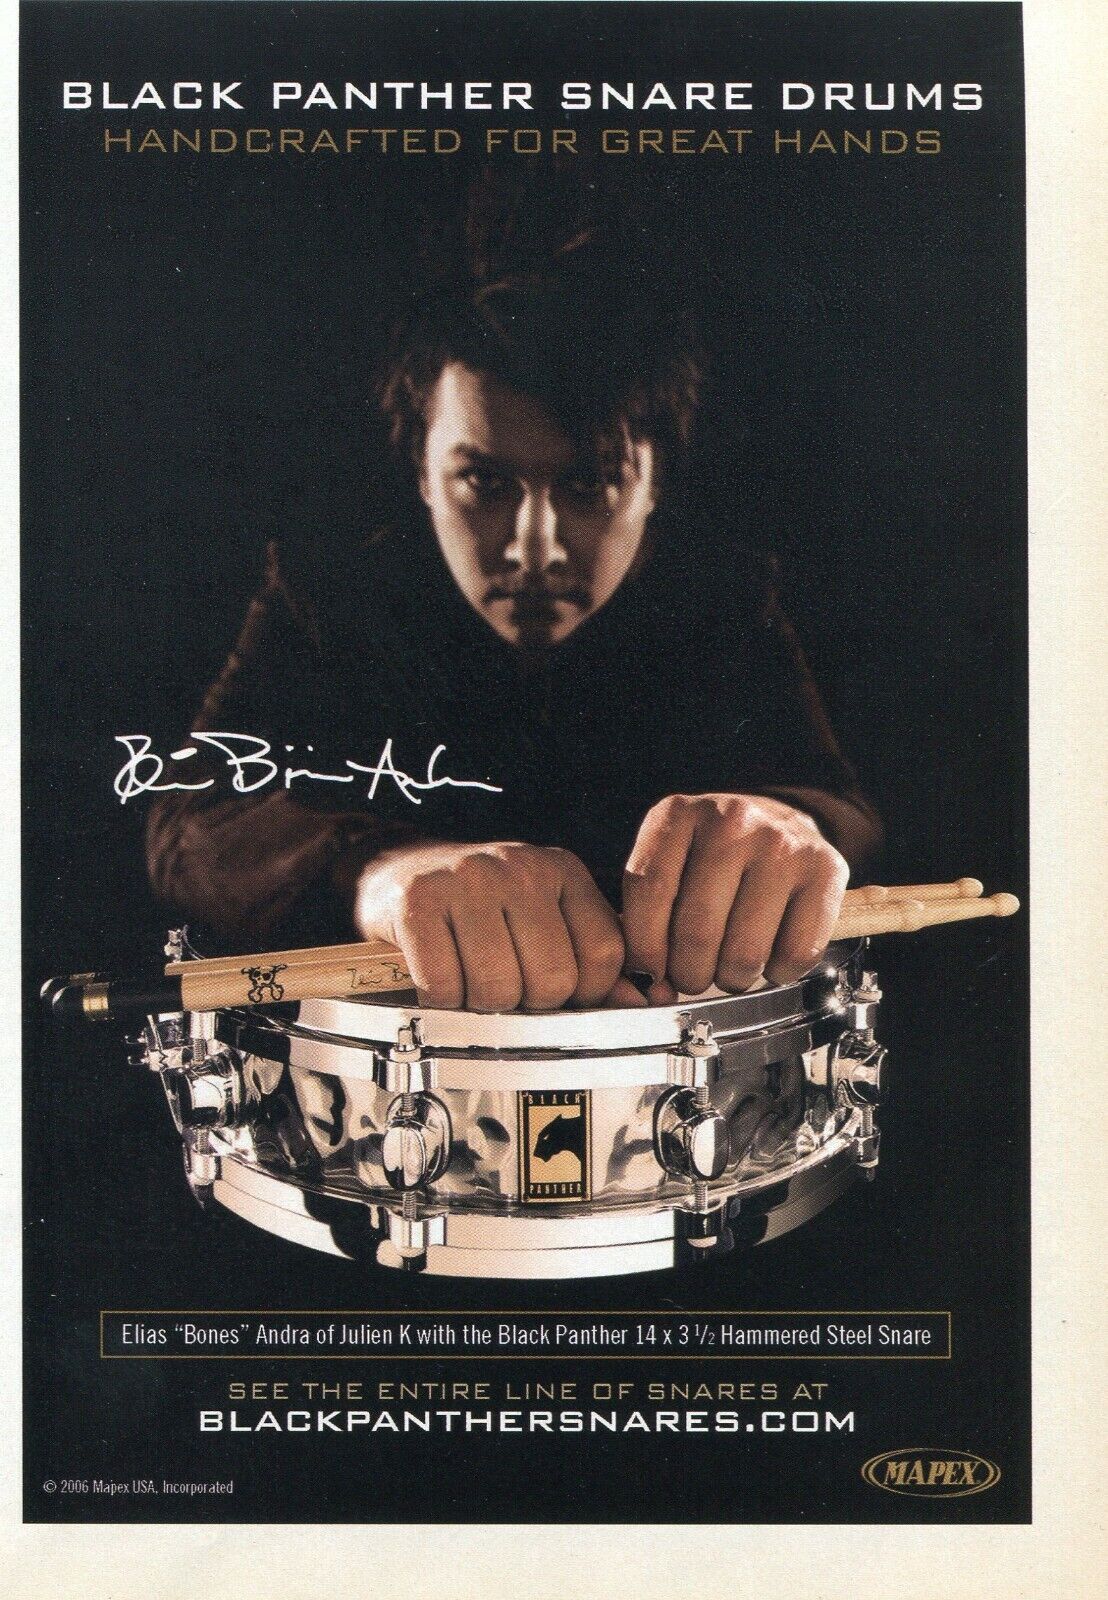 2006 small Print Ad of Mapex Black Panther Steel Snare Drum w Elias Bones Andra